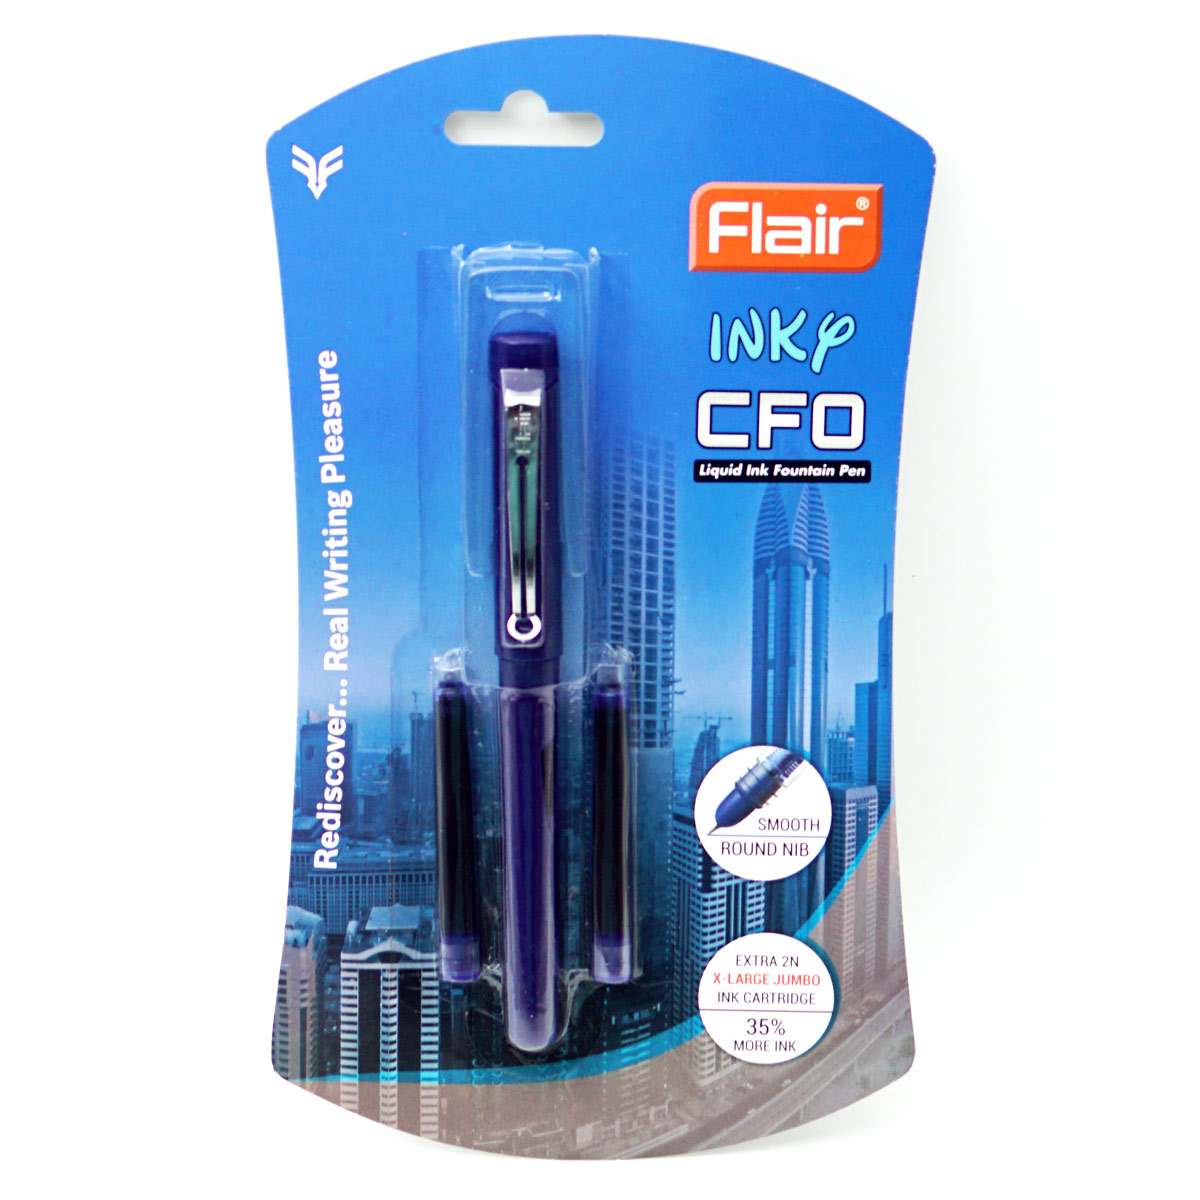 Flair Inky CFO Model:15600 Blue Color Body with Cap Type and 2 Ink Catridge Fine Nib Fountain Pen